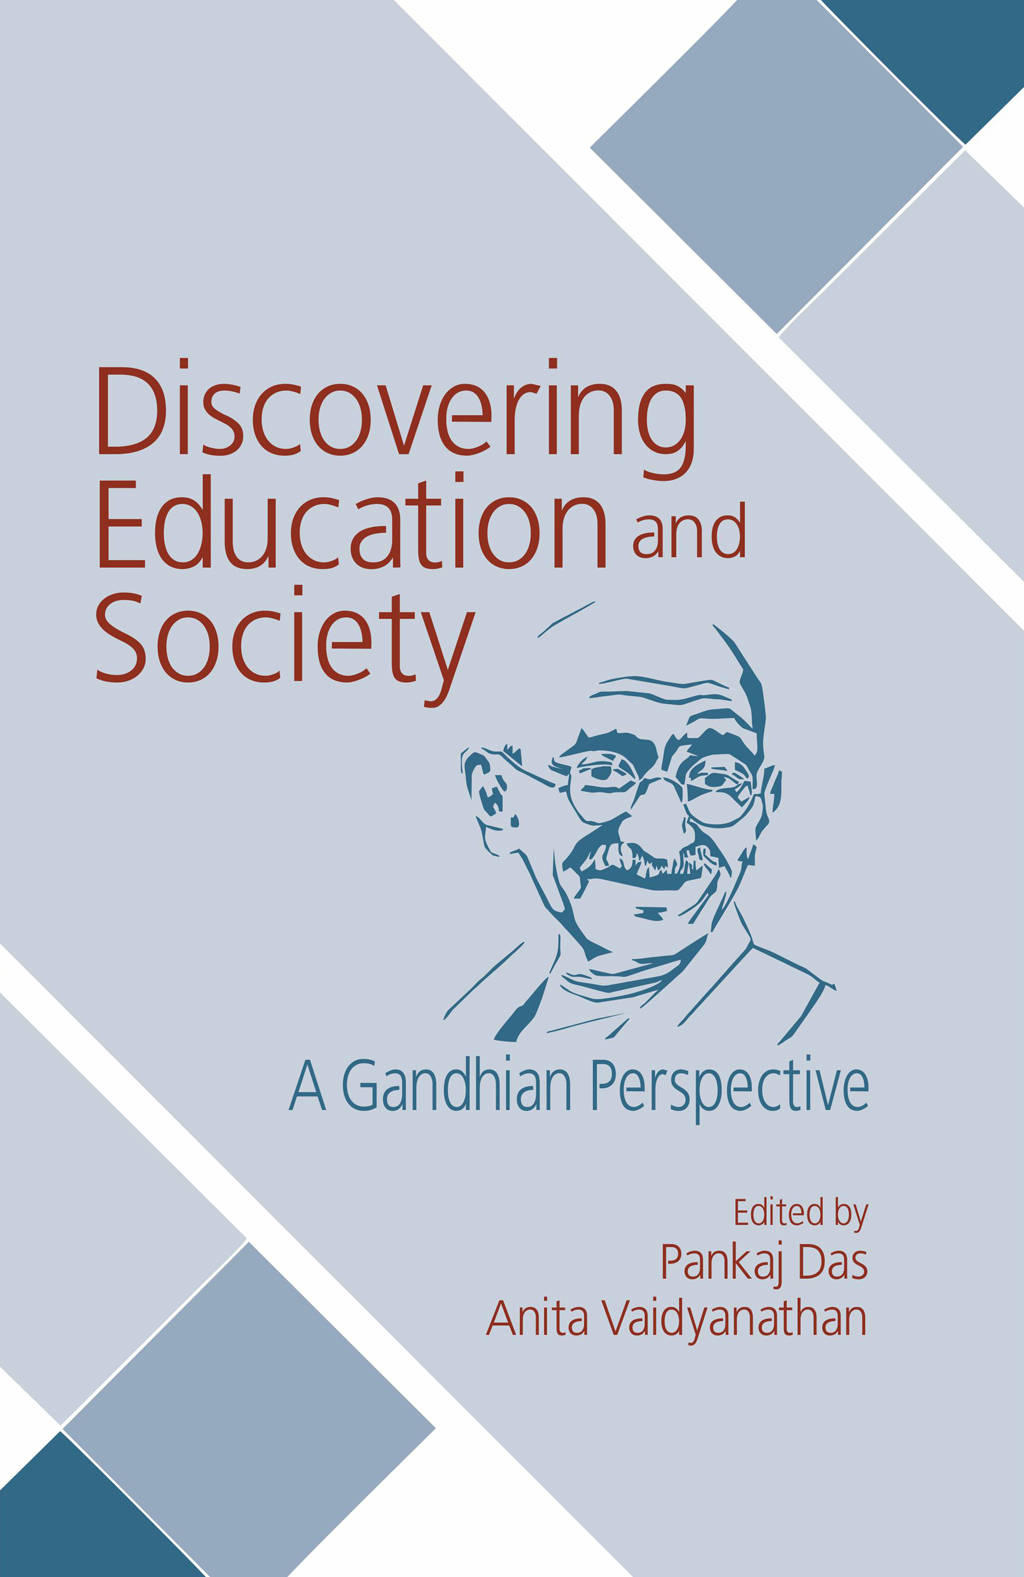 Discovering Education and Society: A Gandhian Perspective book cover page